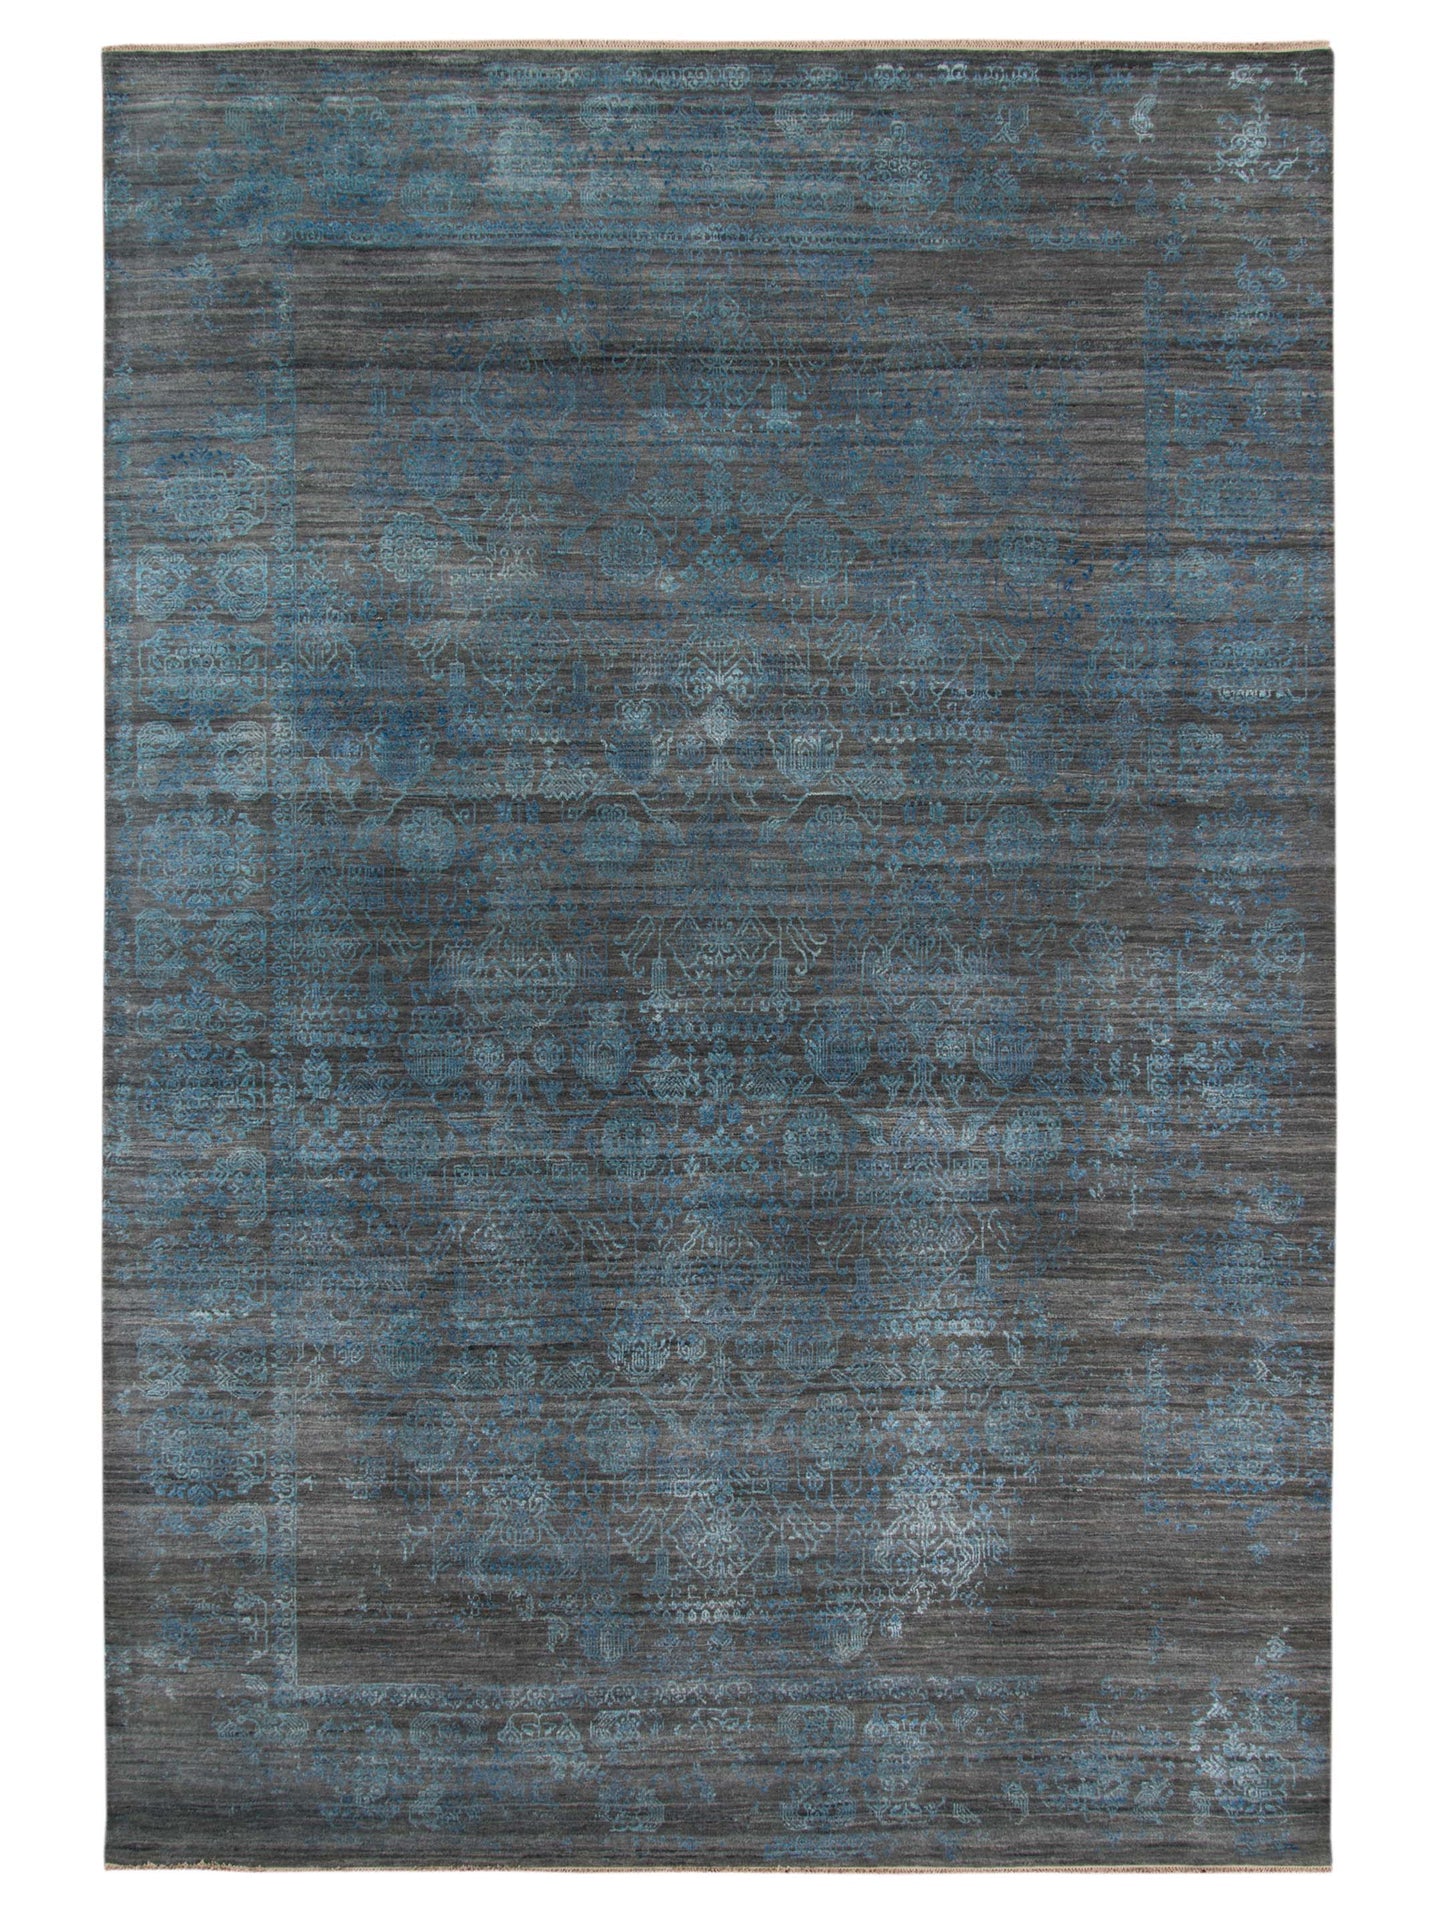 Limited PARKES PA-564 SLATE Transitional Knotted Rug